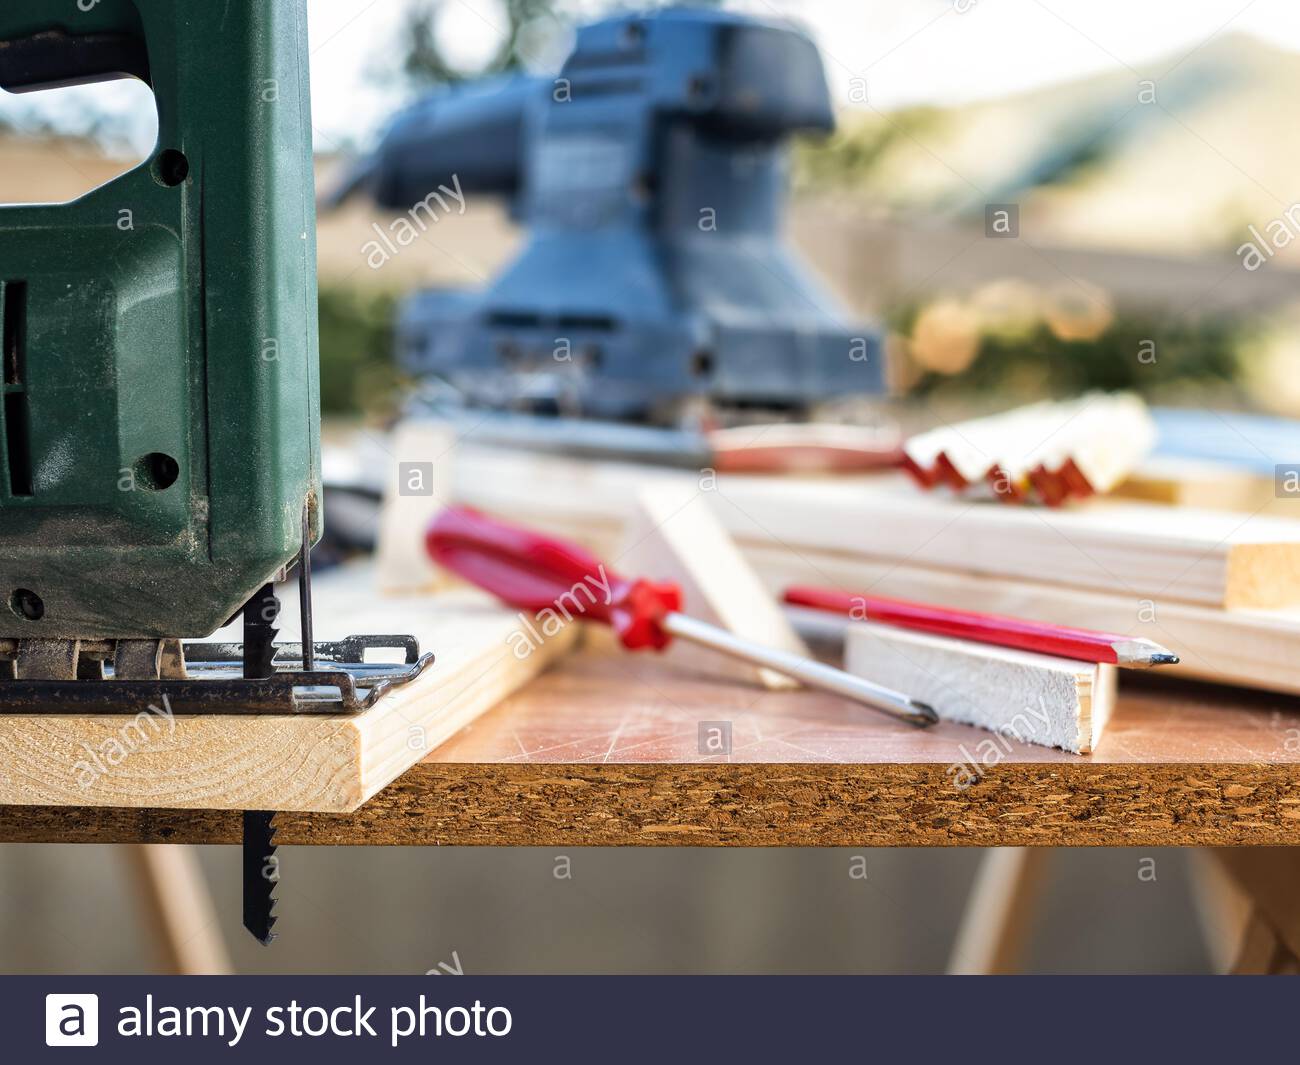 Professional Woodworking Tools Manual Electric Saw For Cutting Wood Housework Do It Yourself Stock Photography Stock Photo Alamy